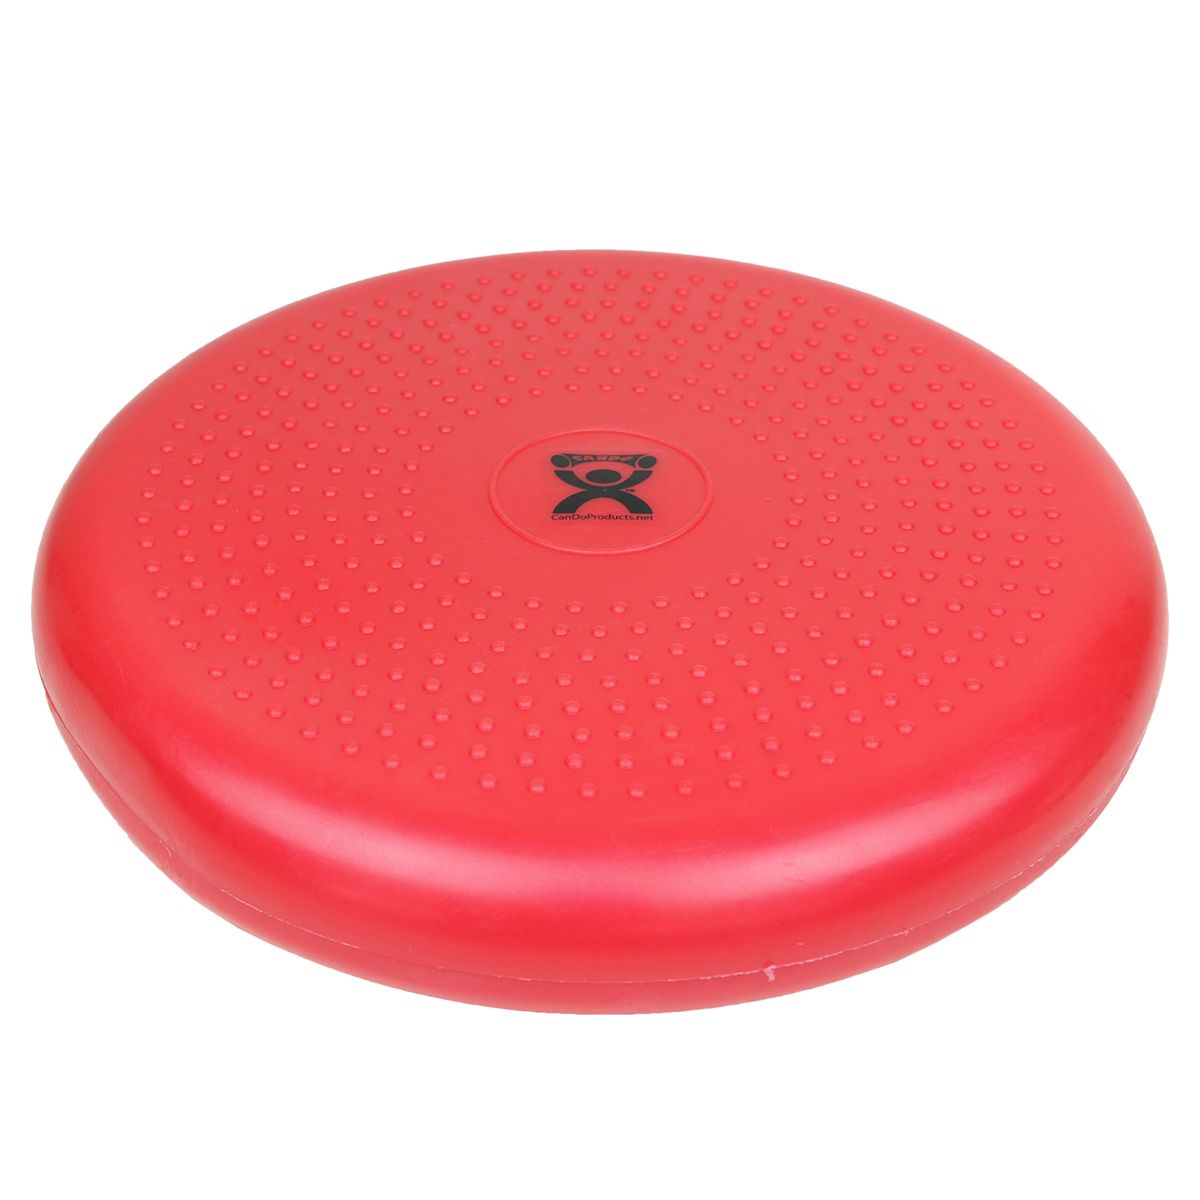 Cando Inflatable vestibular seating/standing disc, red, 35 cm (13.8 in)